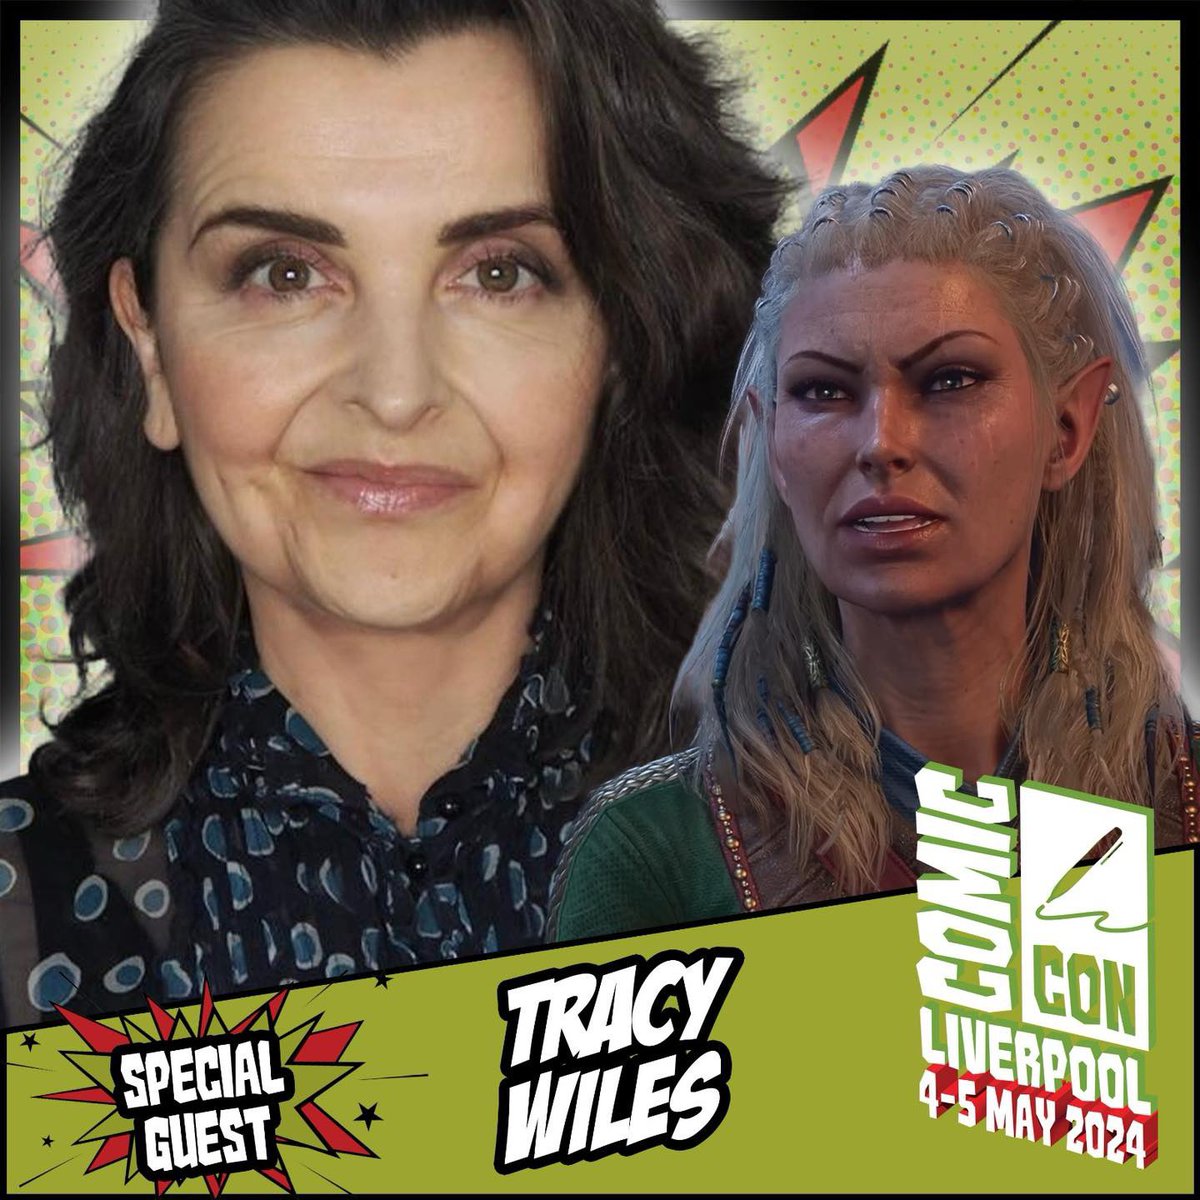 Comic Con Liverpool welcomes Tracy Wiles (@TracyWiles), known for projects such as Baulder’s Gate 3, Love at First Sight, Sandman and many more. Appearing 4-5 May! Tickets: comicconventionliverpool.co.uk